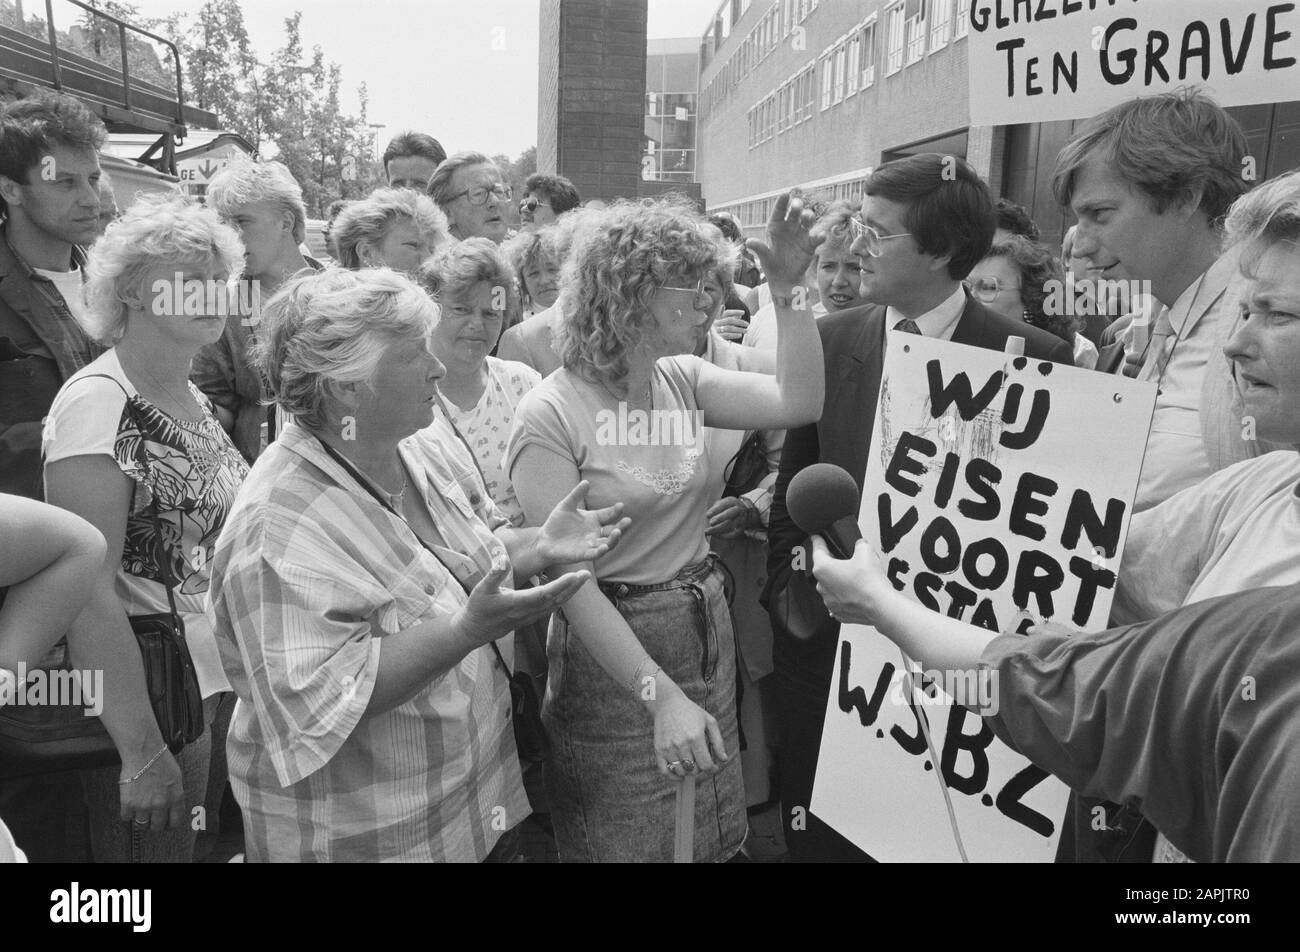 Demonstration employees municipal cleaning company WSBZ against privatization with right the aldermen Jonker (glasses and Ten Have Date: May 25, 1988 Location: Amsterdam, Noord-Holland Keywords: PRIVIZATION, WORKERS, ALANDERS, demonstrations, cleaning companies Personal name: Jonker Stock Photo